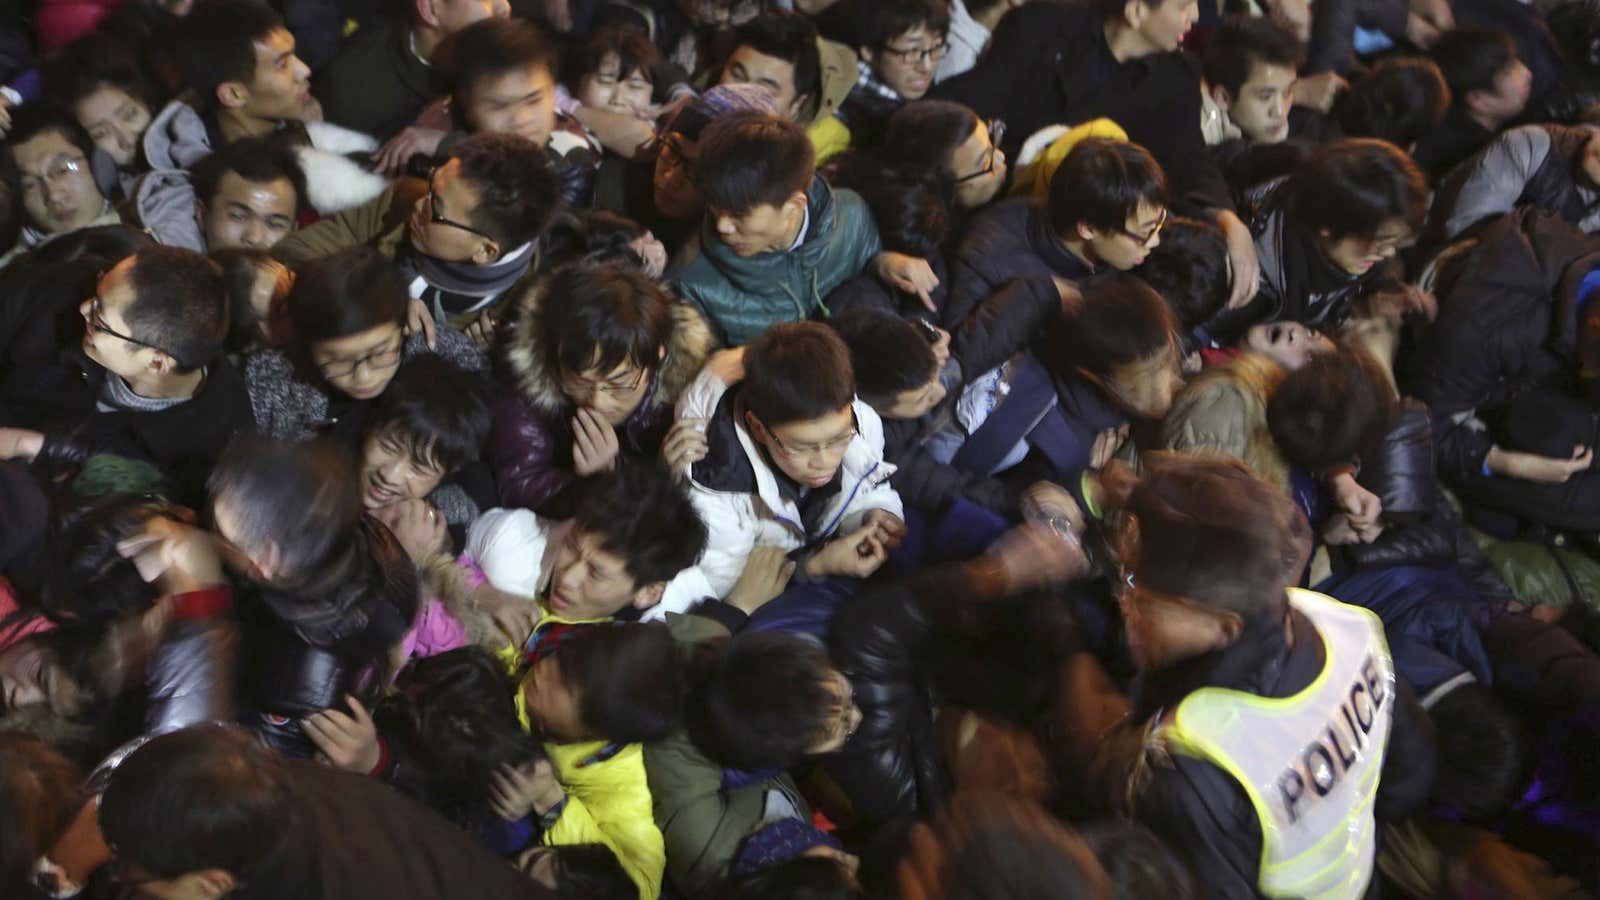 A view of a stampede is seen during the New Year’s celebration on the Bund, a waterfront area in central Shanghai on Dec. 31st.